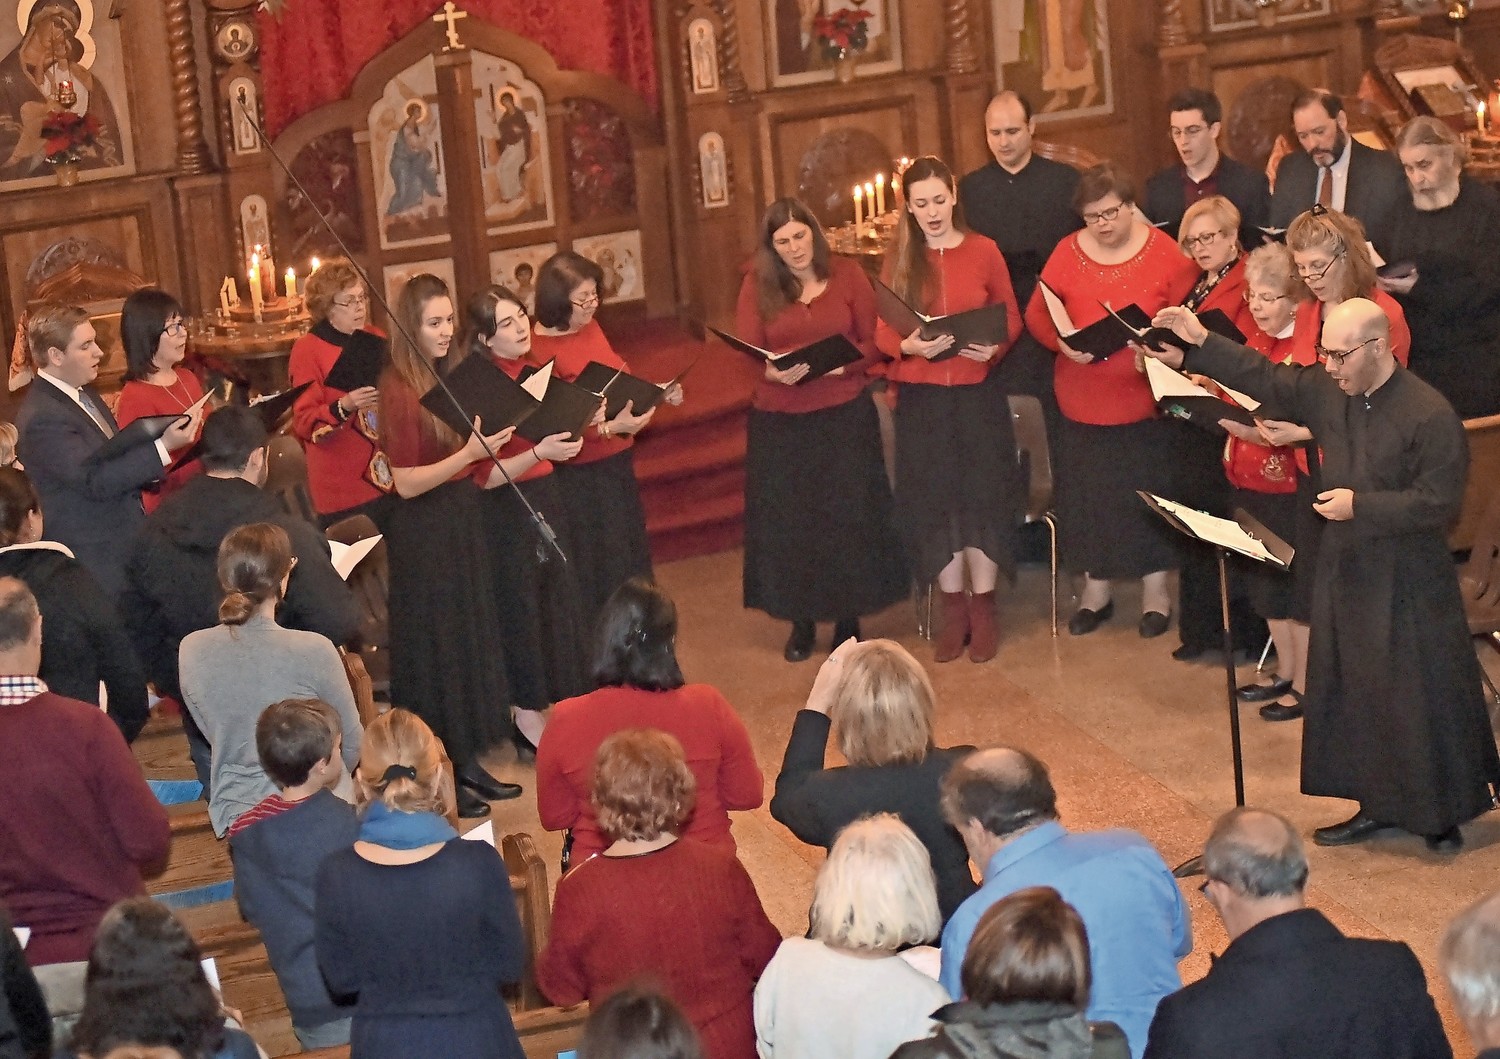 The Holy Trinity Orthodox Church rang in the festive holiday season during its annual Christmas concert on Dec. 2. The church choir sang a medley of spiritual songs, led by music Director Dr. Nicholas Reeves.